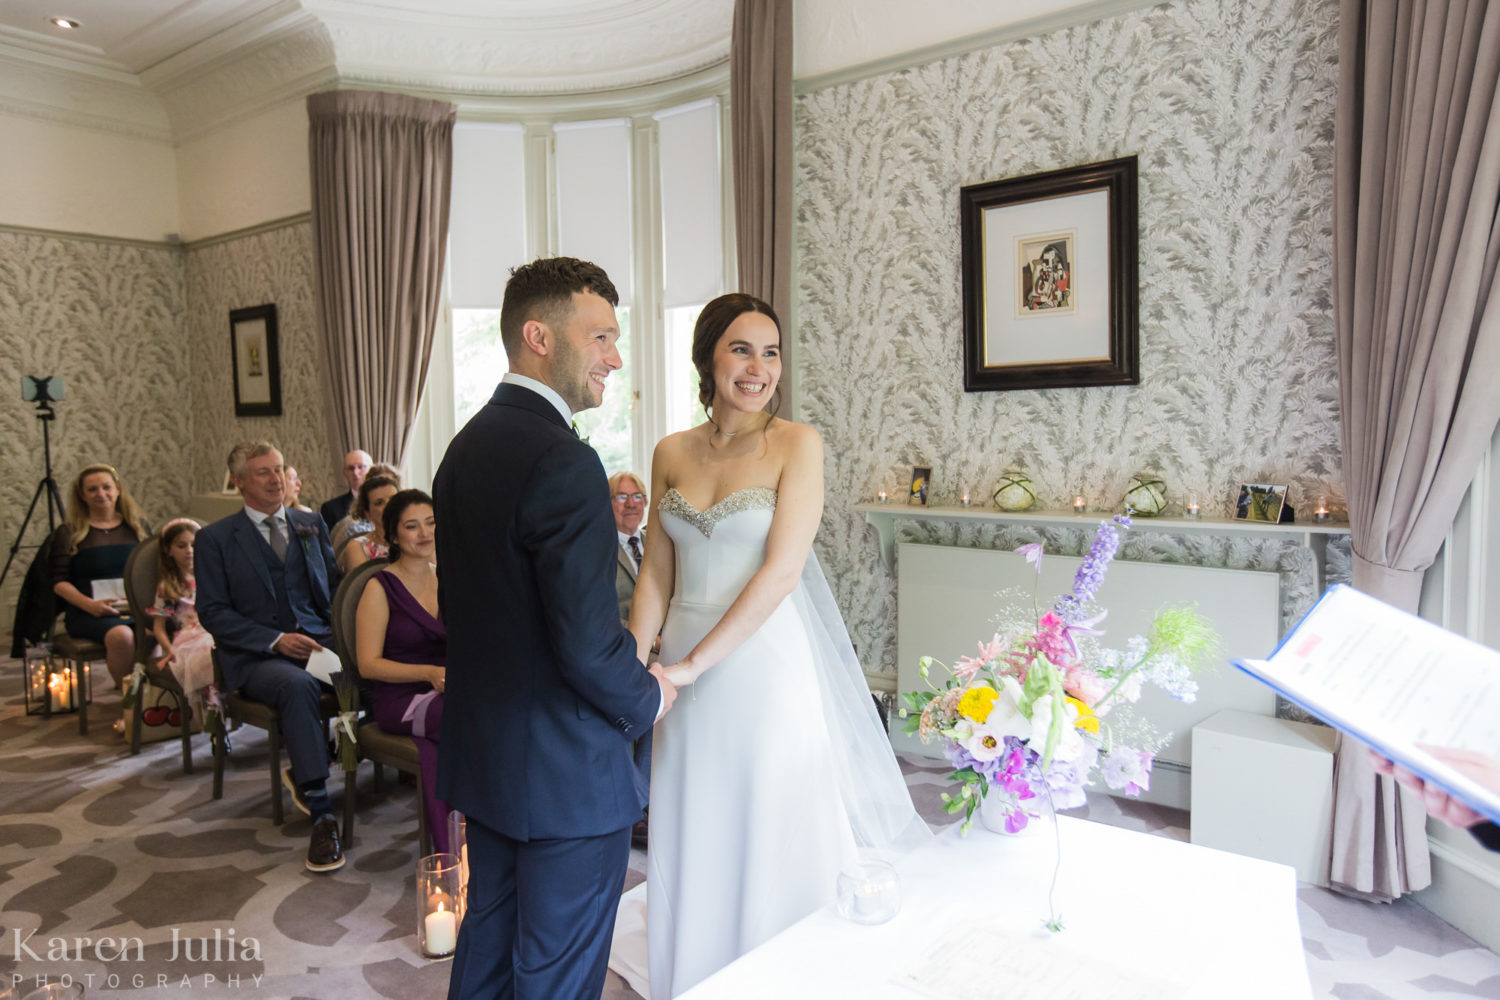 bride and groom holding hands during their wedding ceremony in the Glenlivet room at One Devonshire Gardens